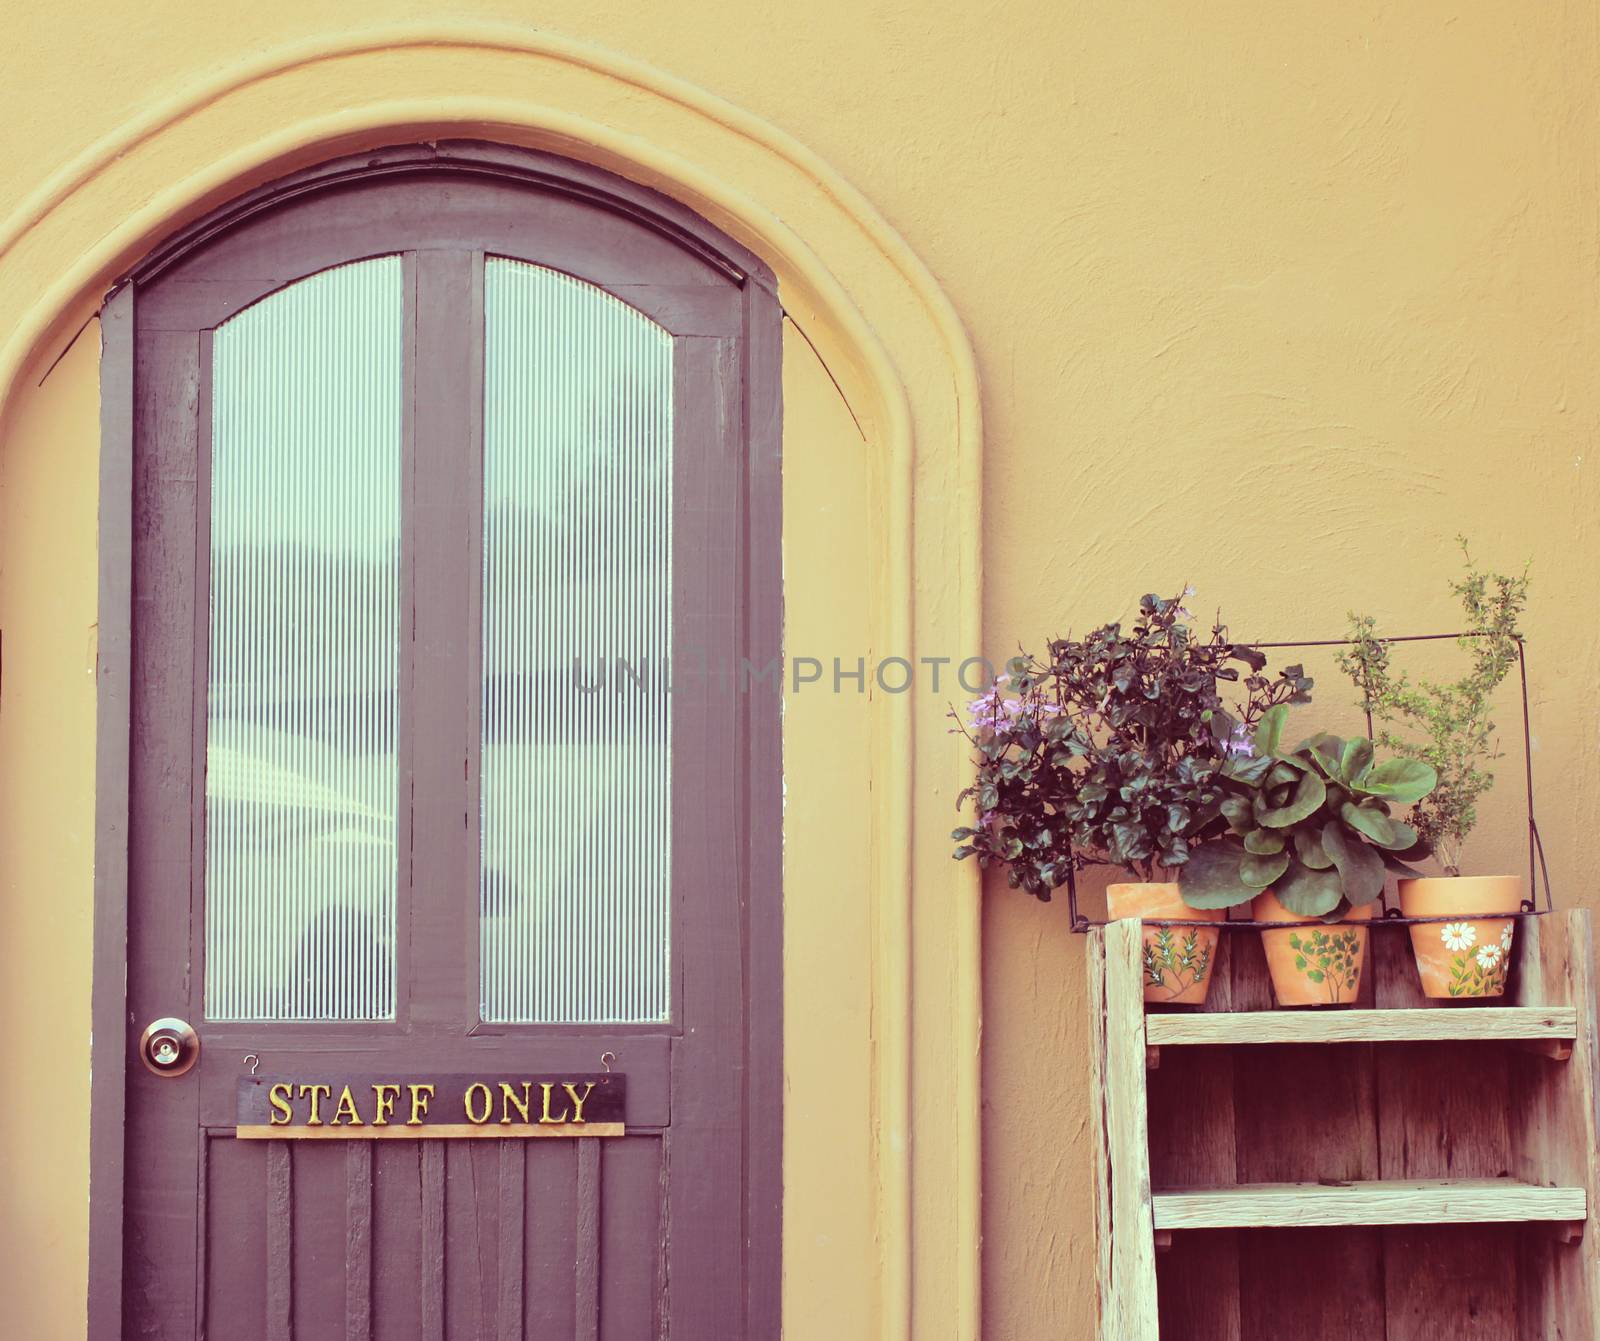 Staff only on door with flower pot for decorated, retro filter e by nuchylee